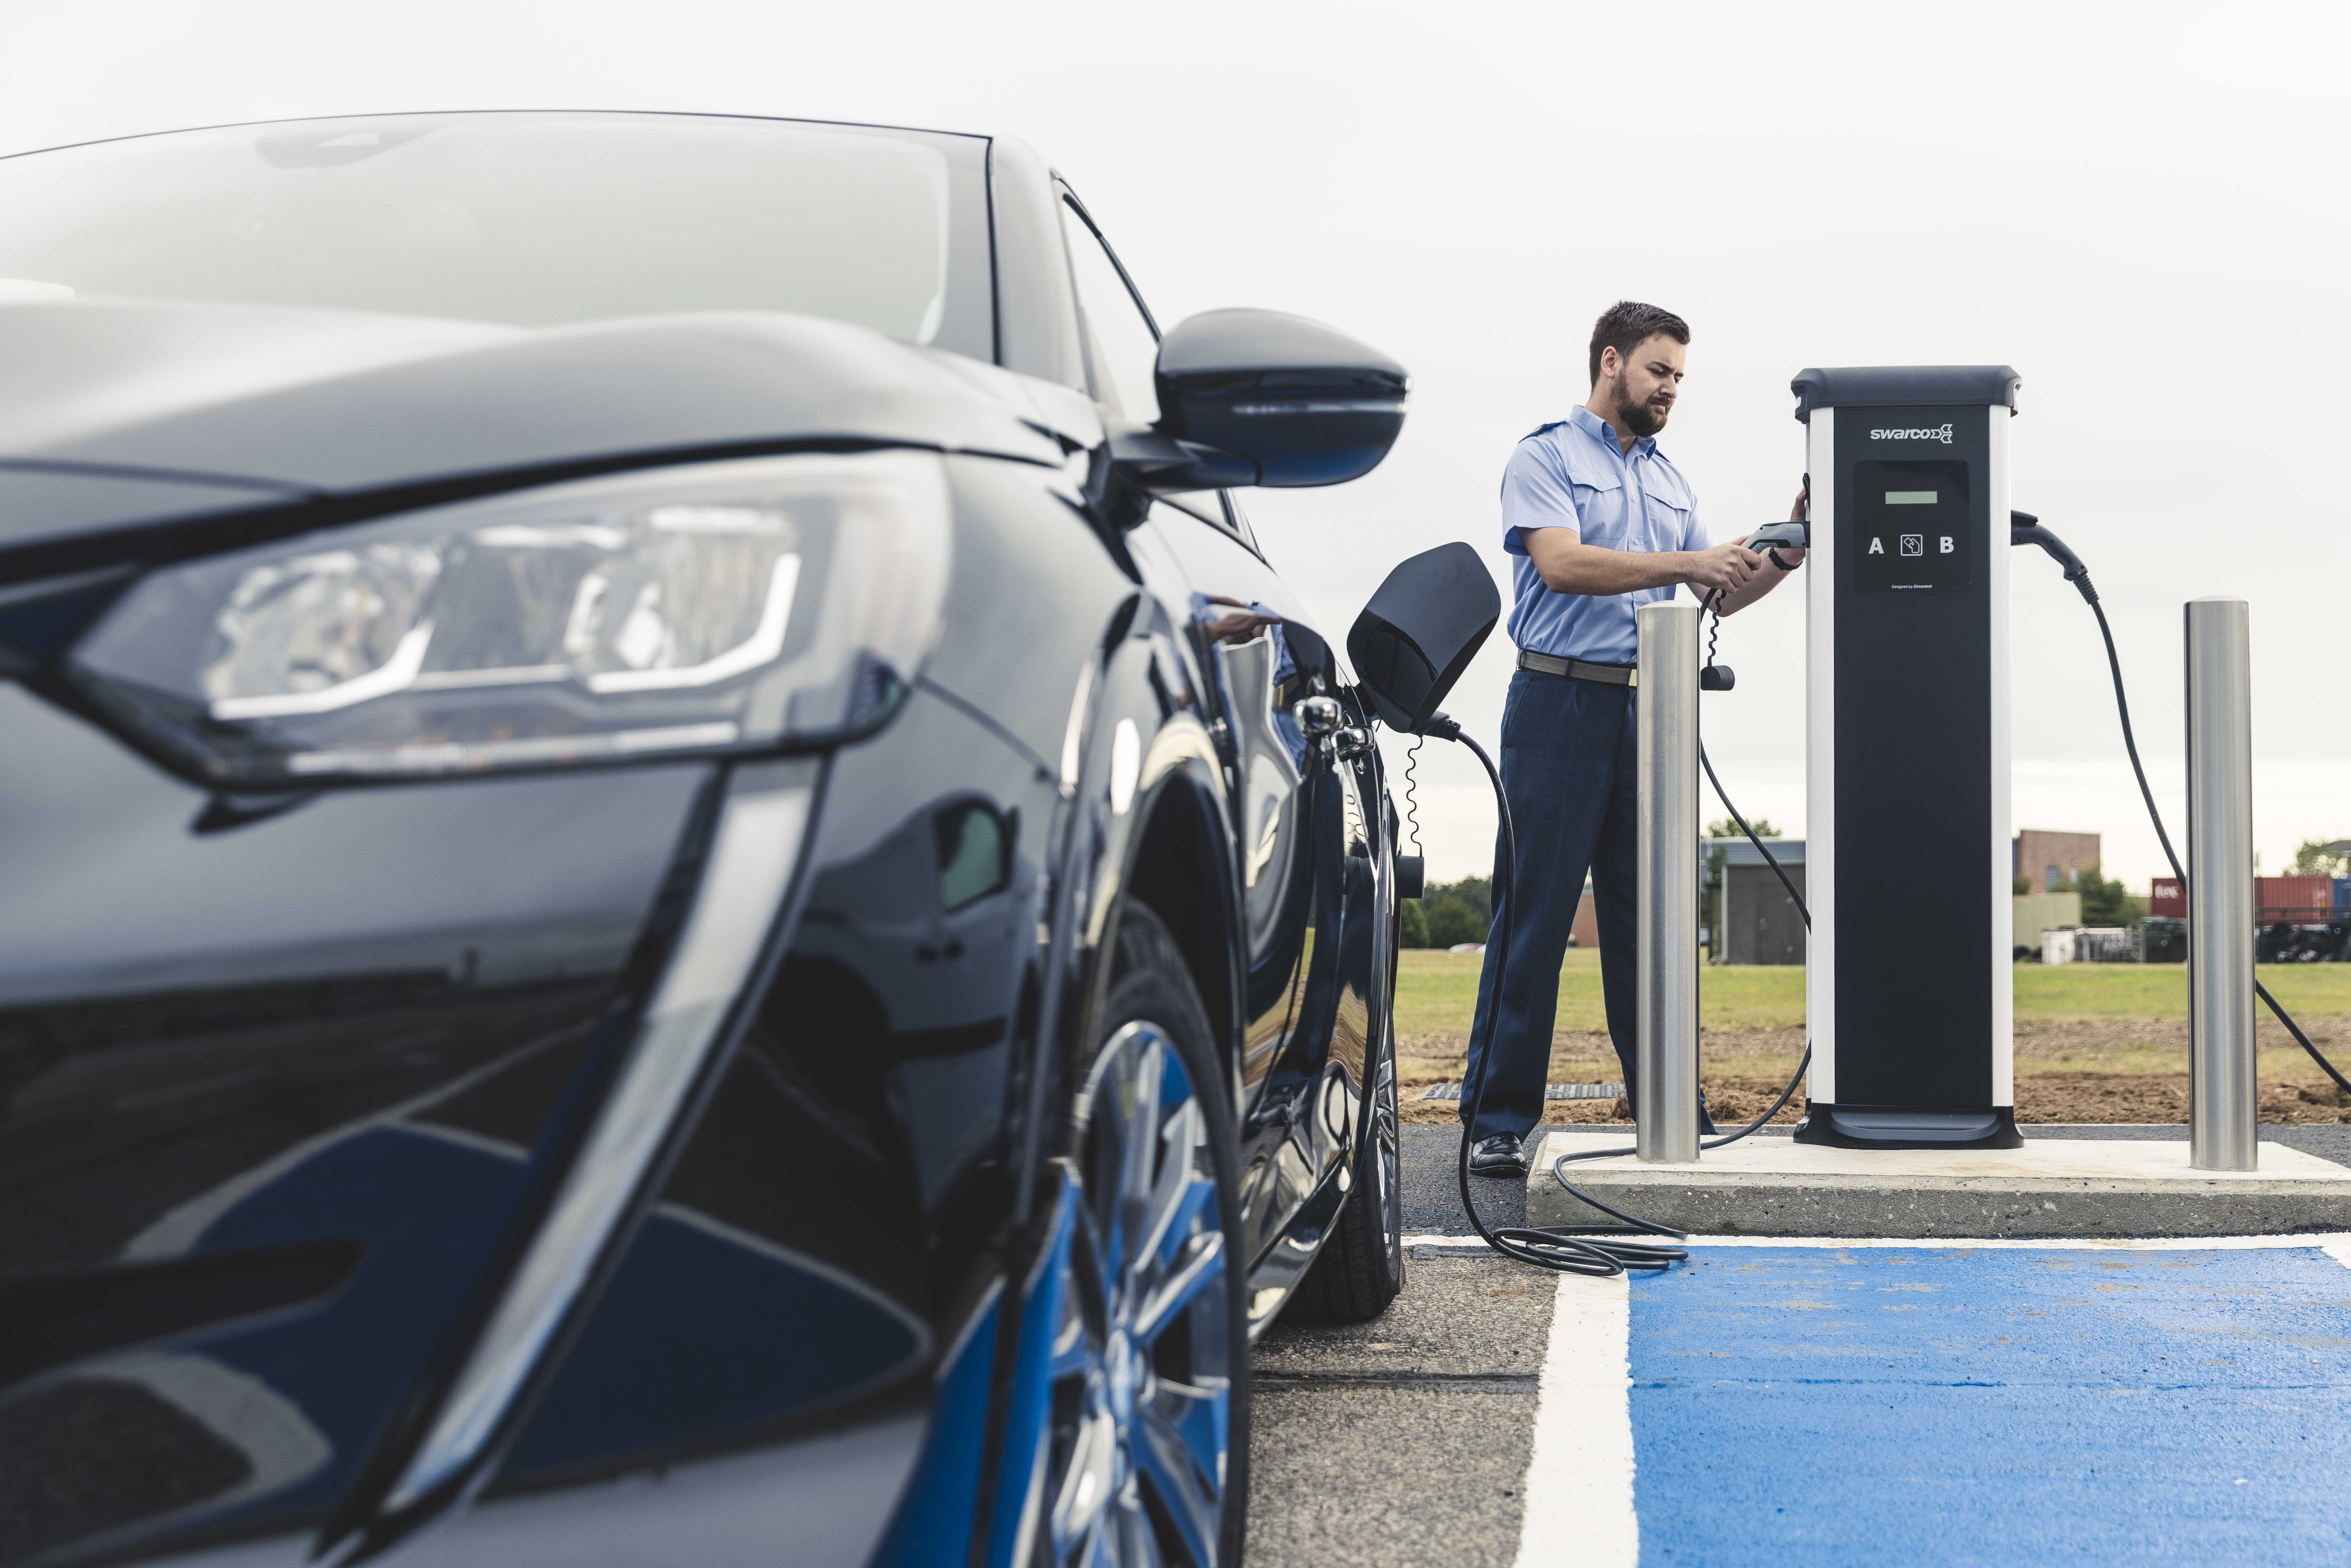 The fast chargers can charge the average electric military vehicle within an hour